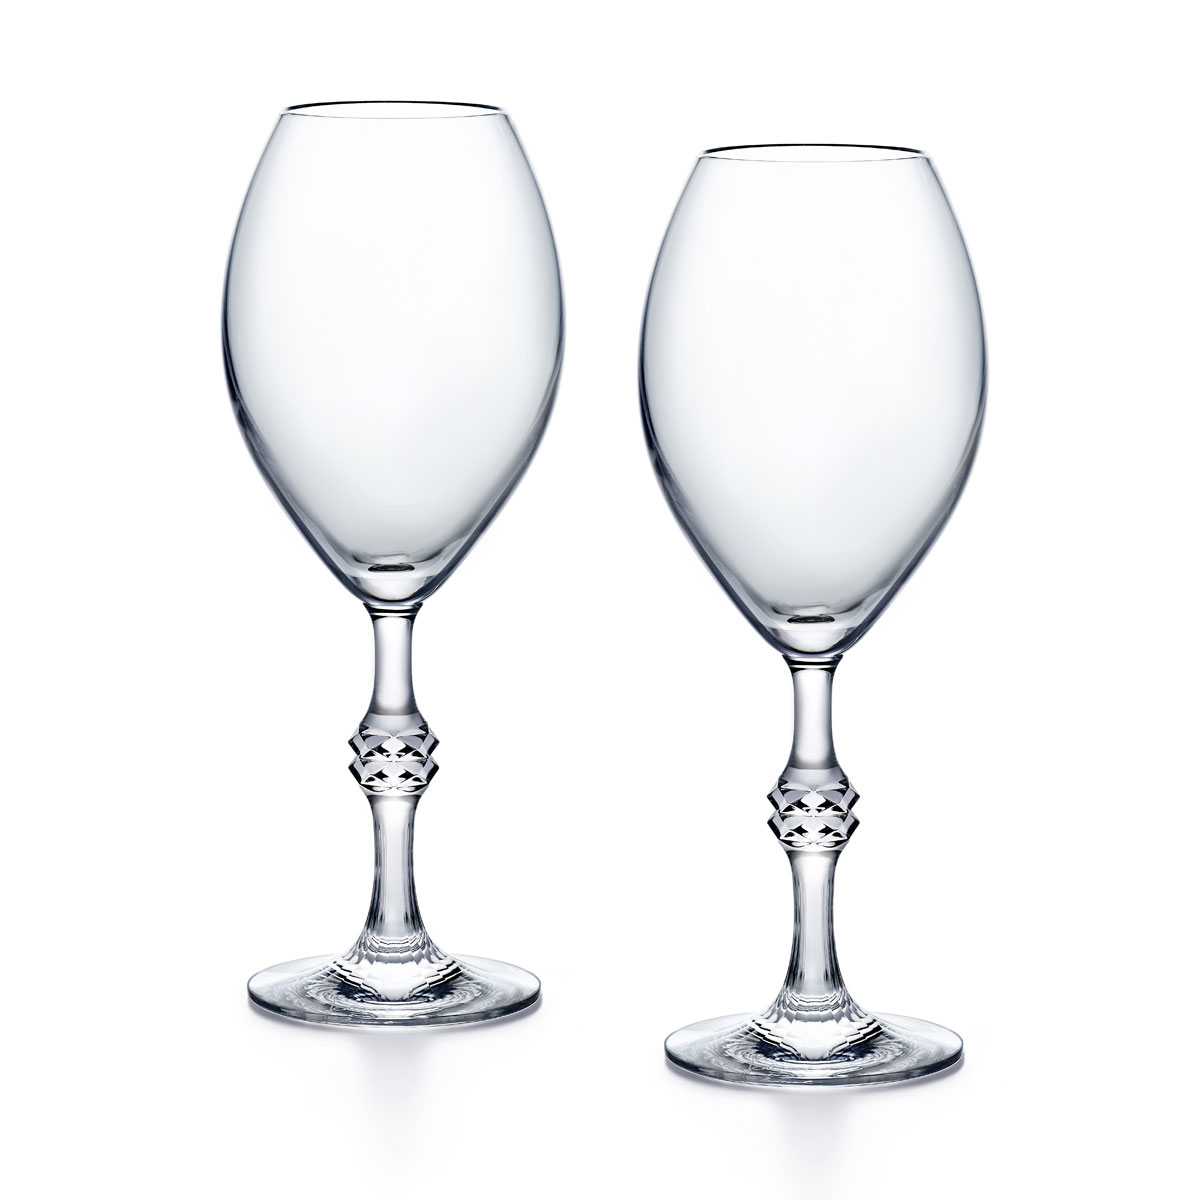 Baccarat Jean-Charles Boisset Passion Champagne Glasses, Pair